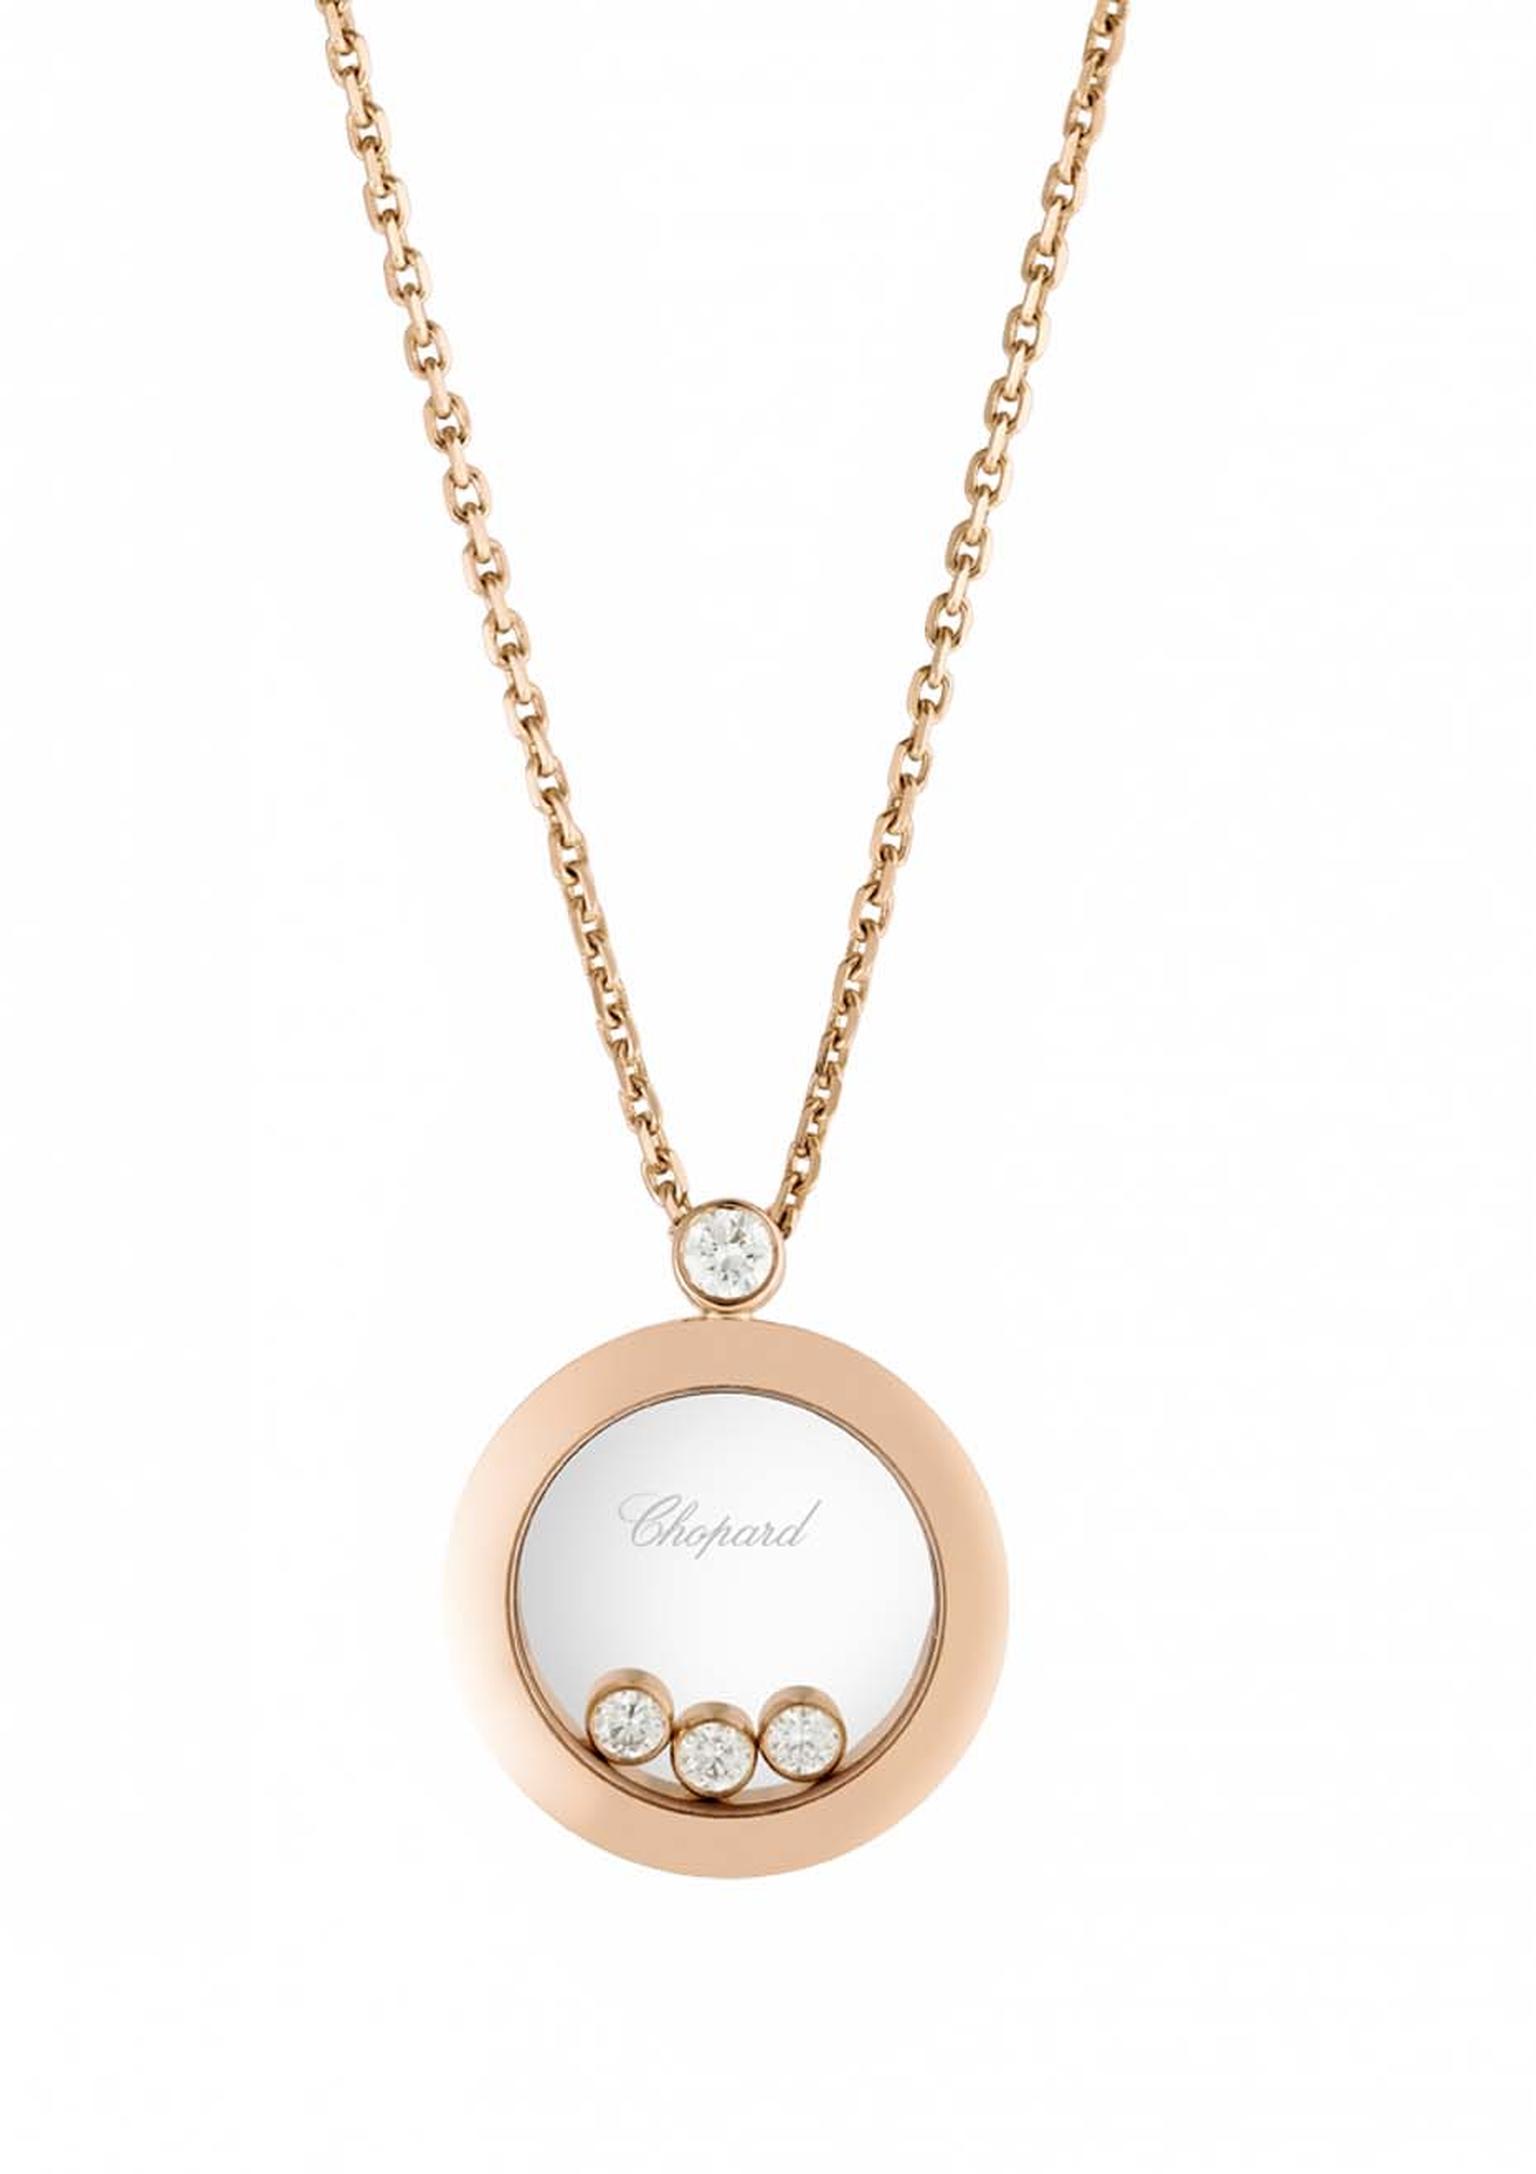 Chopard Happy Diamonds pendant in rose gold featuring three mobile diamonds in a circular disc suspended from a chain with one static diamond (£2,570).